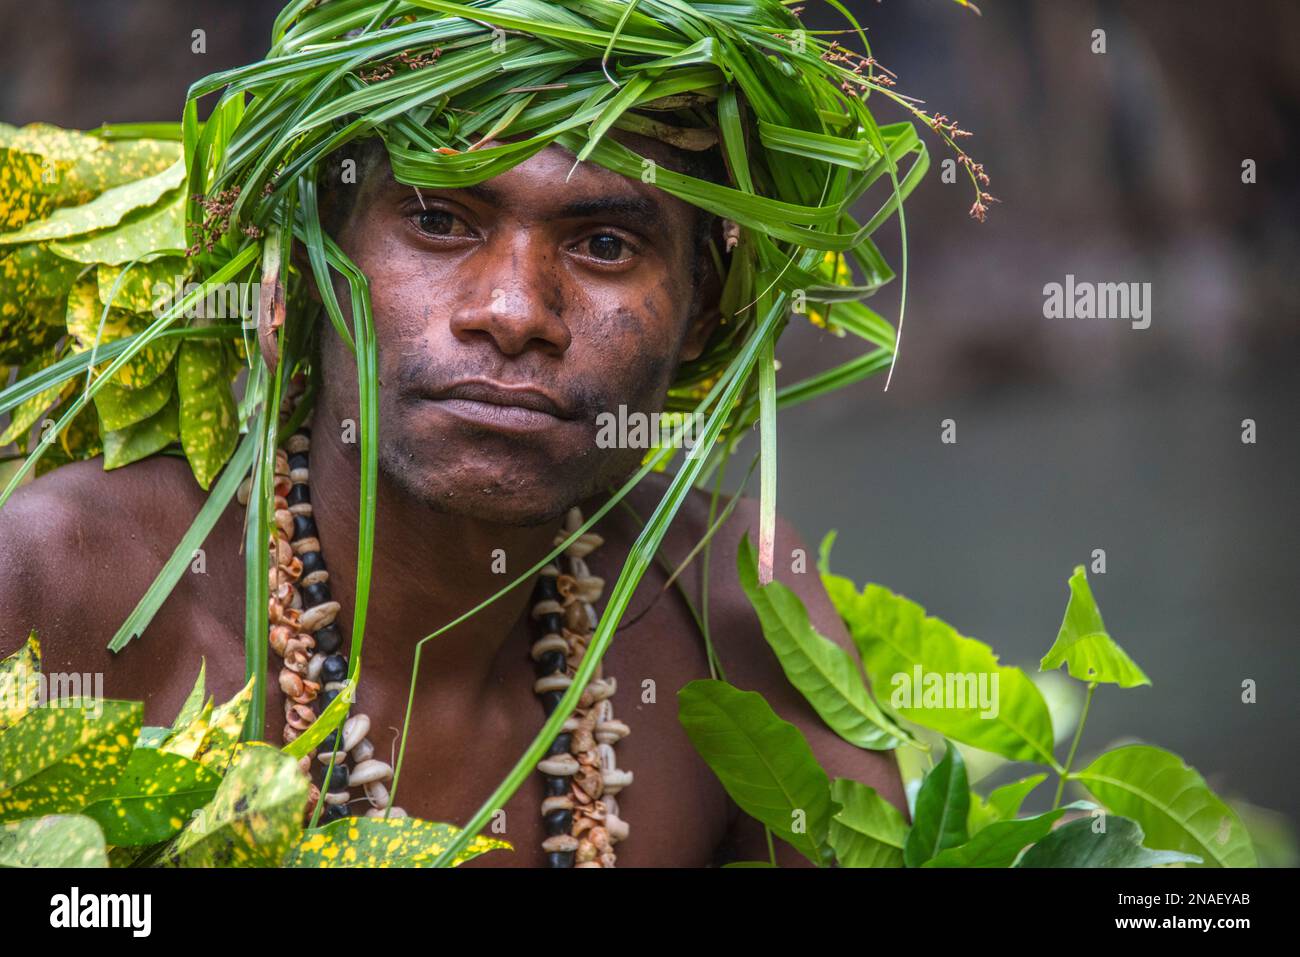 Man from the Jebo tribe, located in the Tufi area of Papua New Guinea. The area is known for the tattooing of women, with each tribe having their own Stock Photo